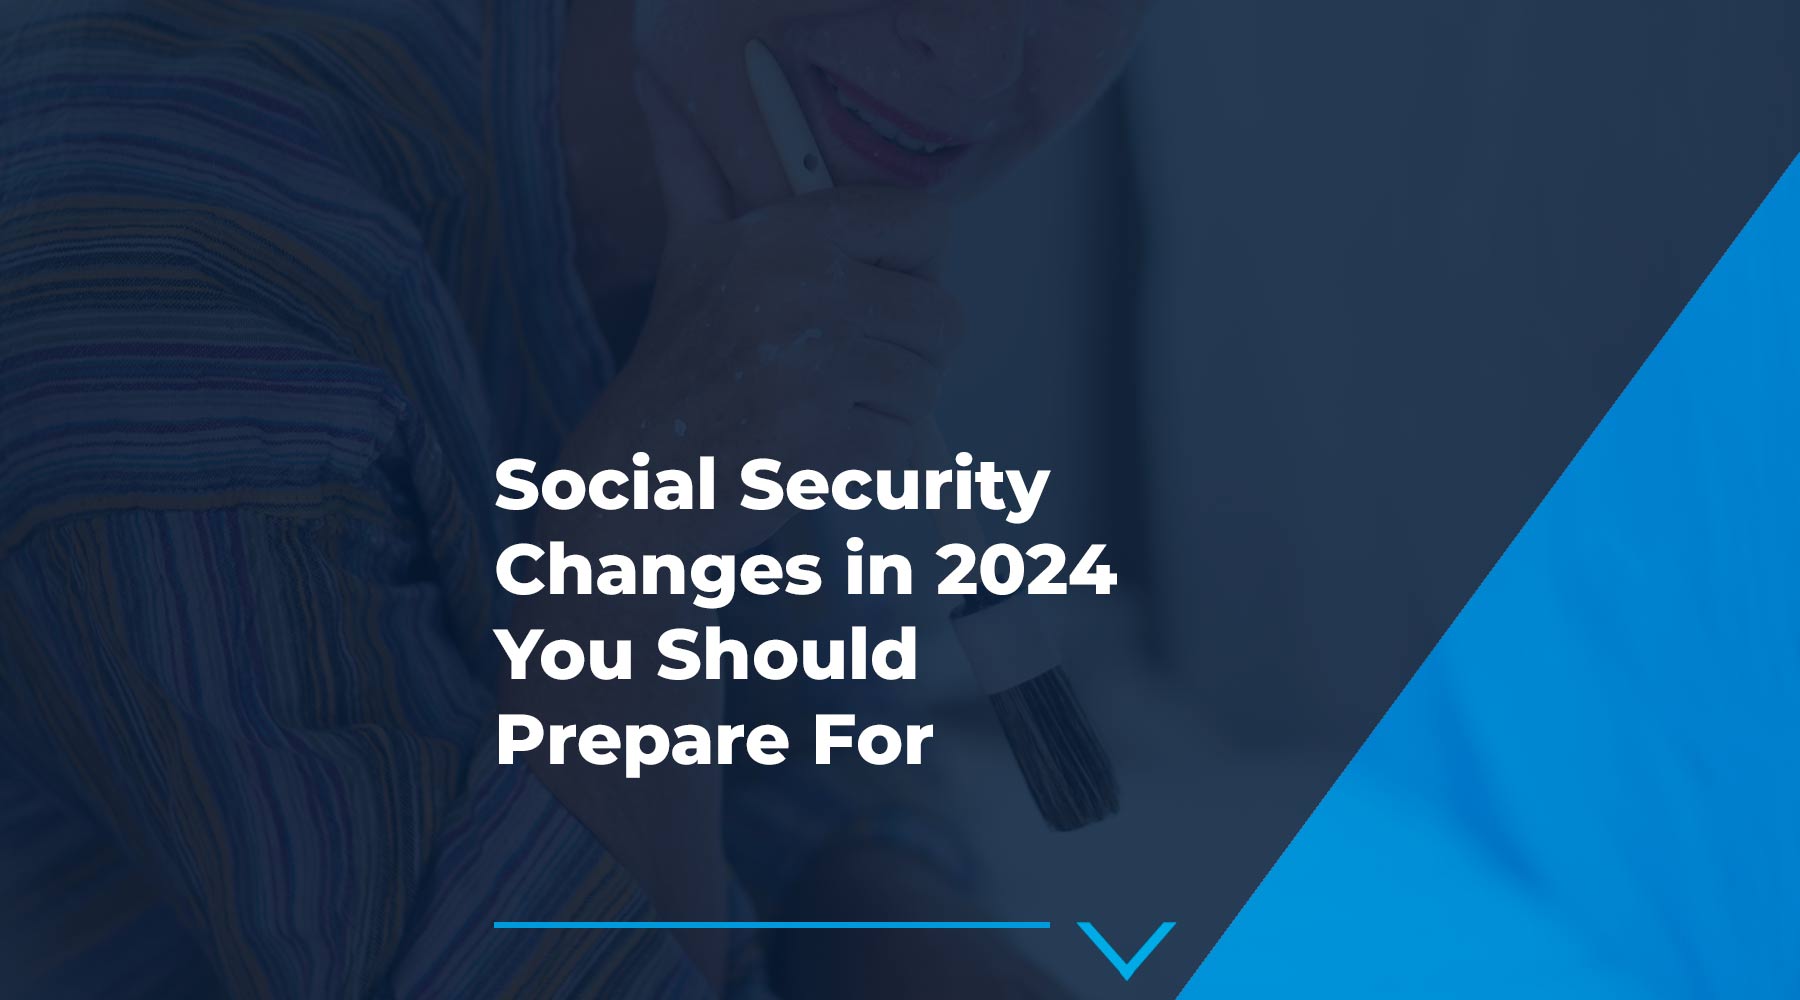 Social Security Changes in 2024 You Should Prepare For